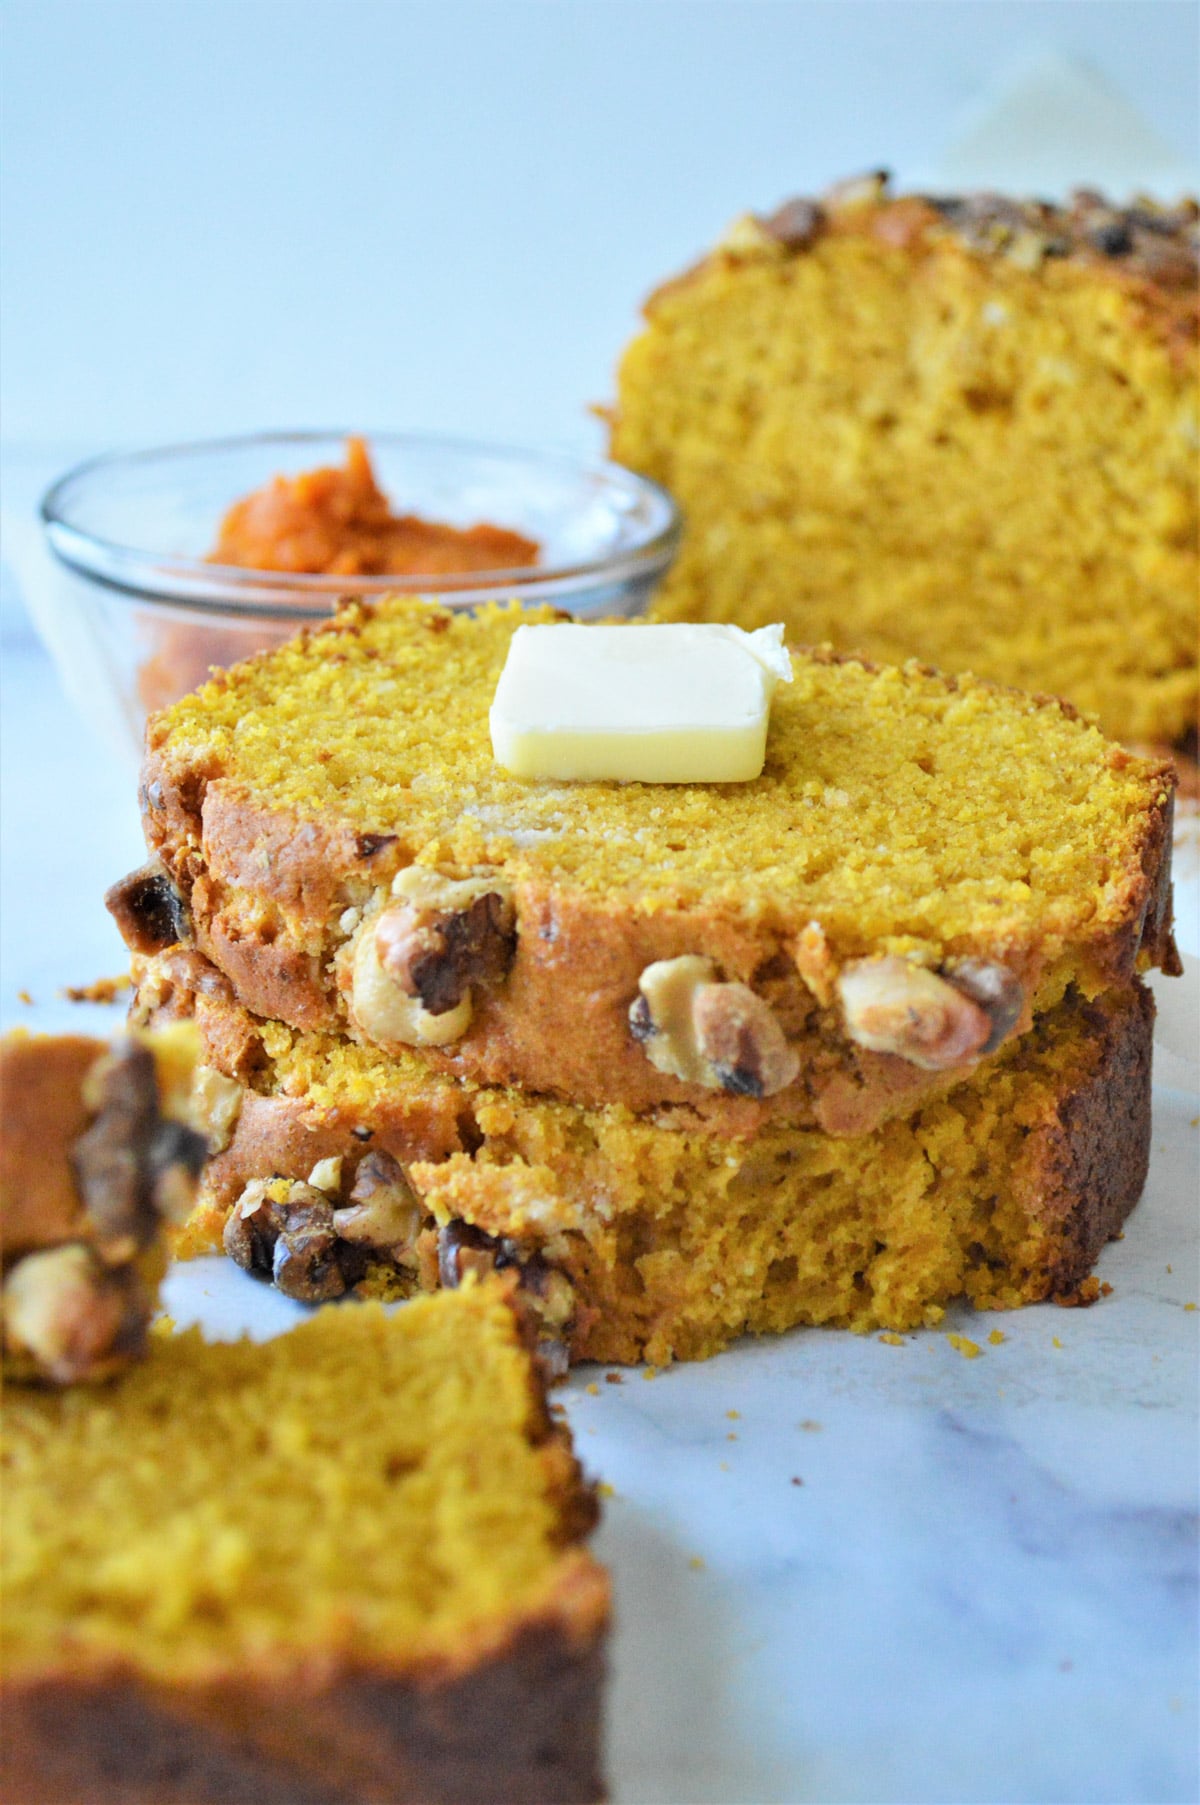 Slices of pumpkin bread with a pat of butter